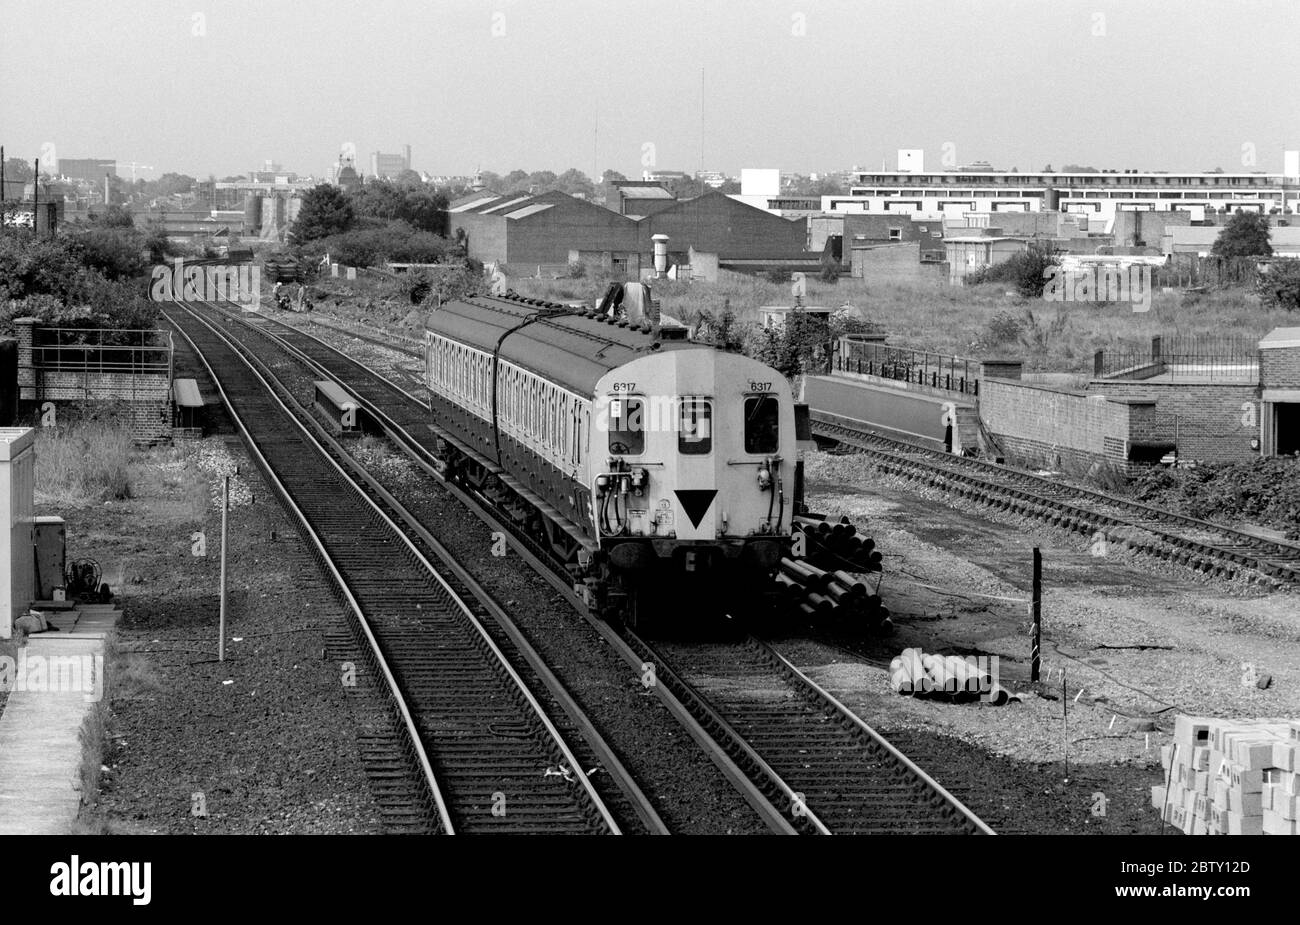 Class 416/3 electric multiple unit No. 6317 approaching Caledonian Road and Barnsbury station with a Richmond to North Woolwich service, London, UK. 8th September 1986. Stock Photo